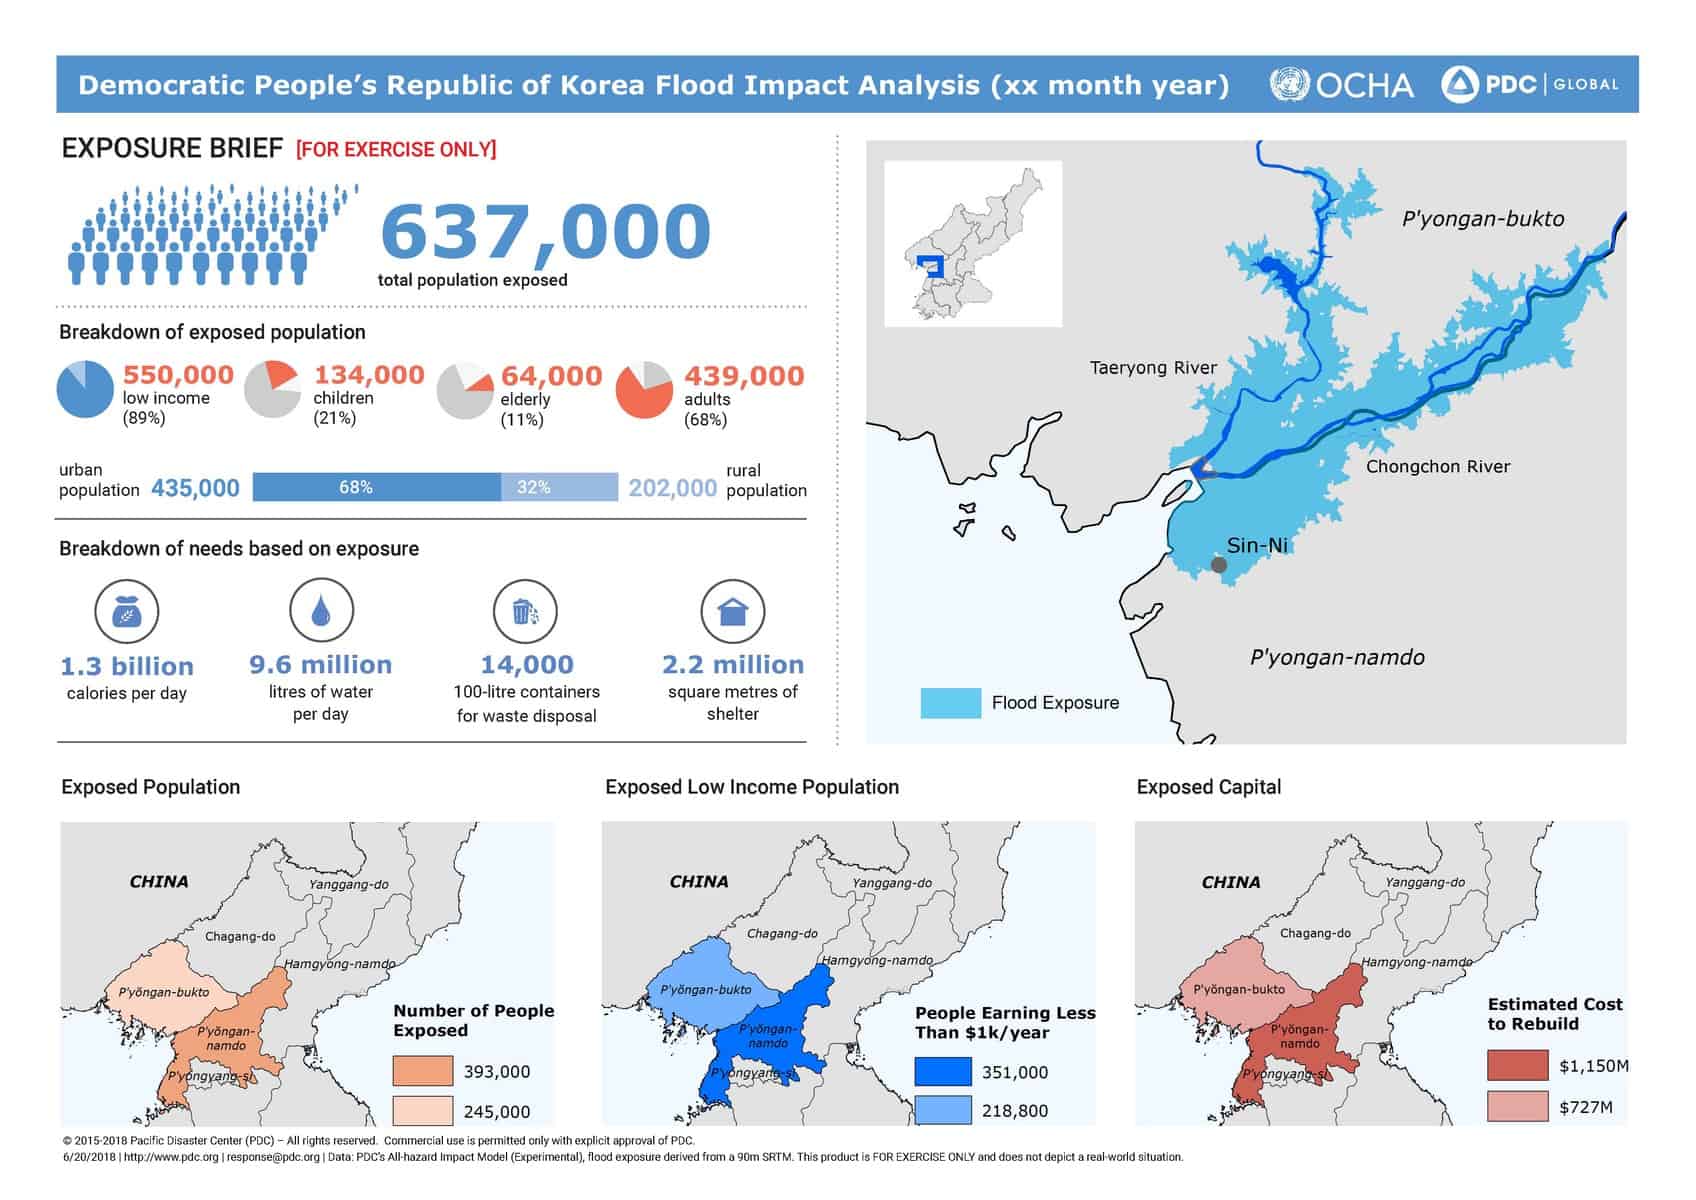 With data provided by both UNOCHA and PDC, this joint exercise product, depicting simulated flood impacts within the DPRK, was showcased during a recent UNOCHA workshop.